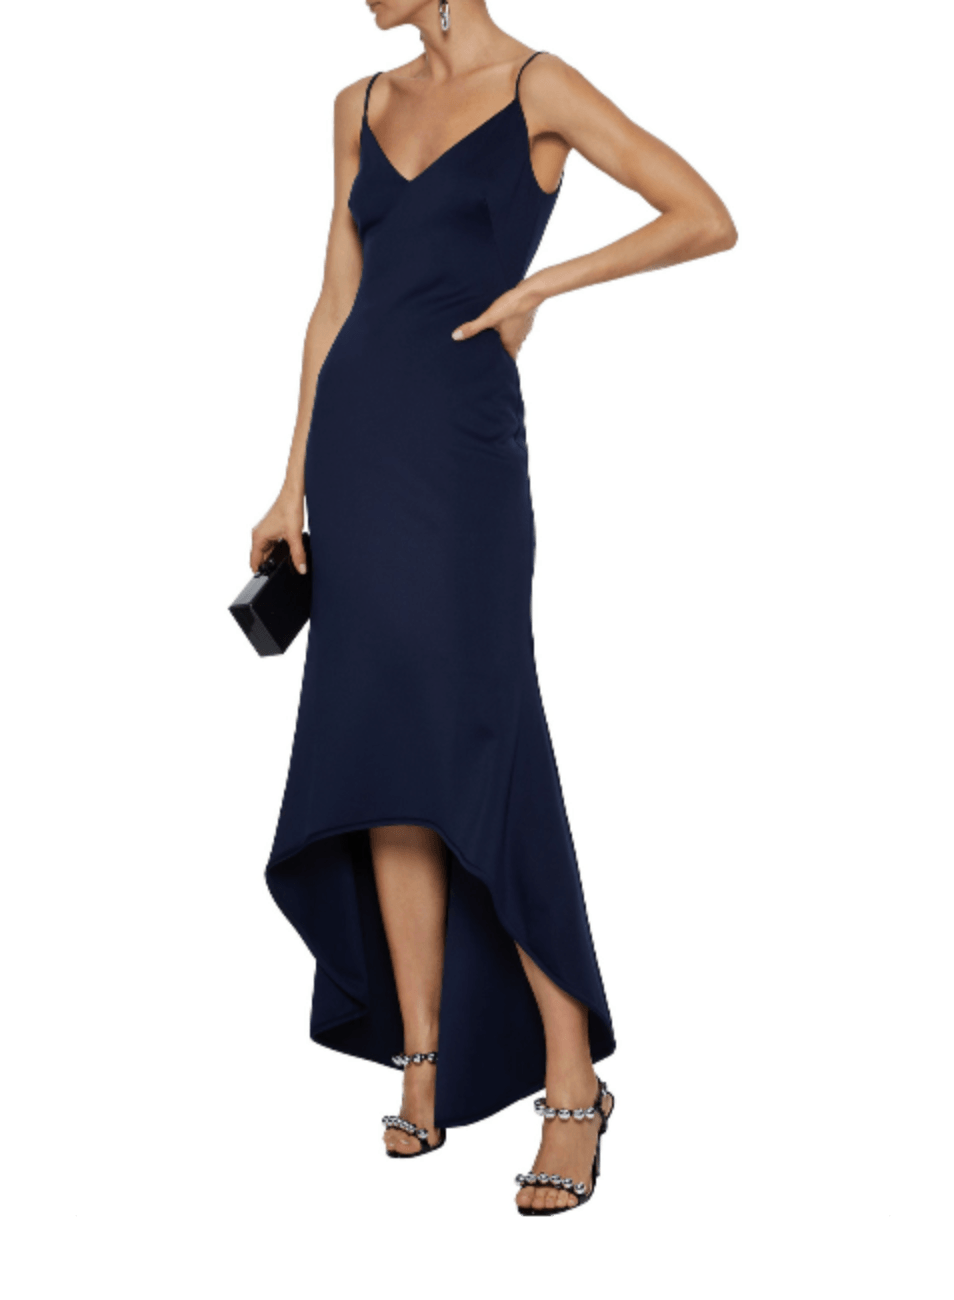 ASYMETRIC GOWN - NAVY BLUE - codressing